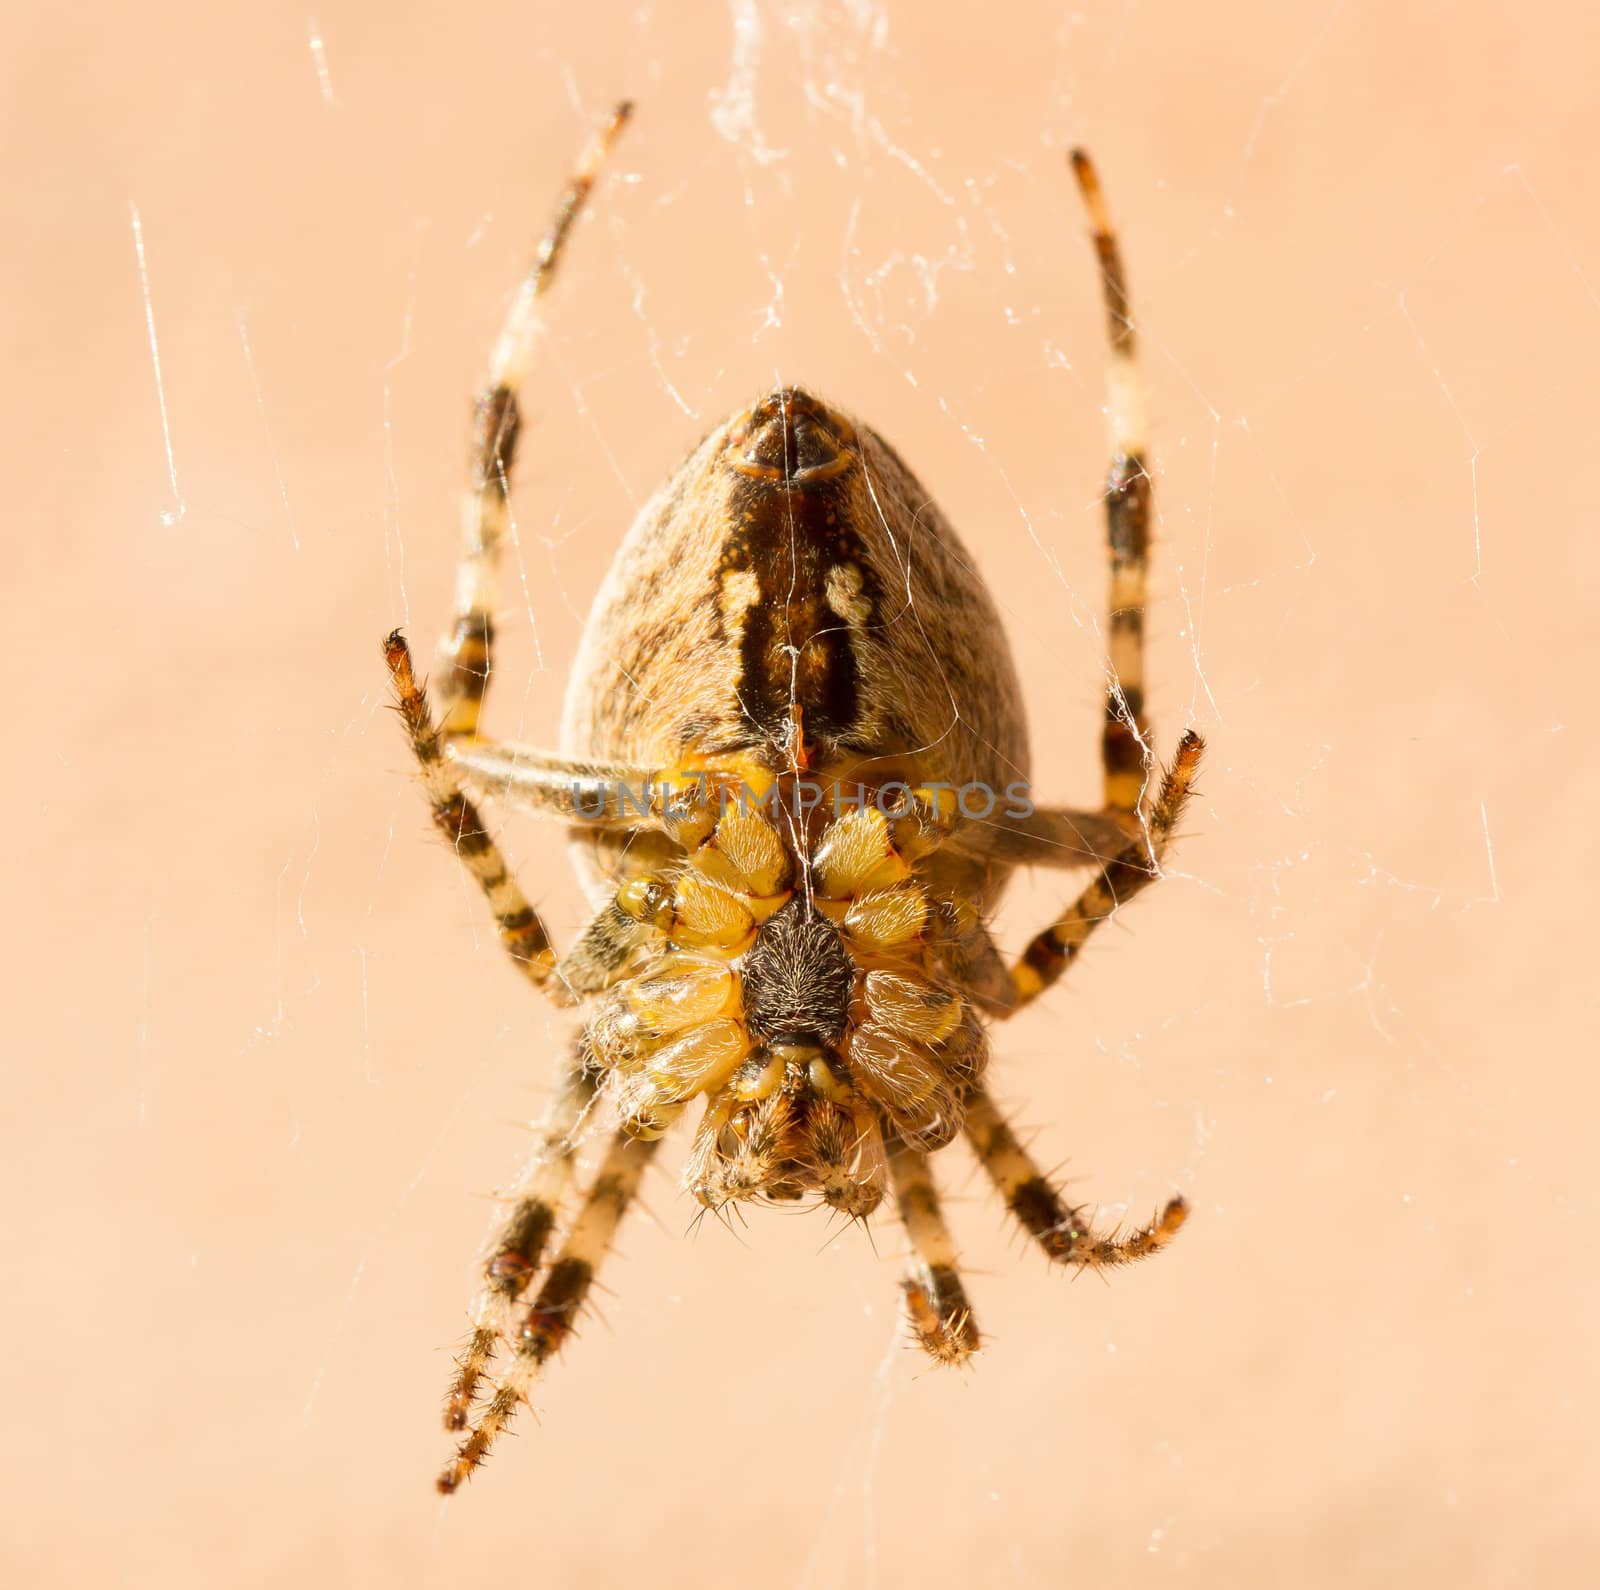 A close-up of a cross spider